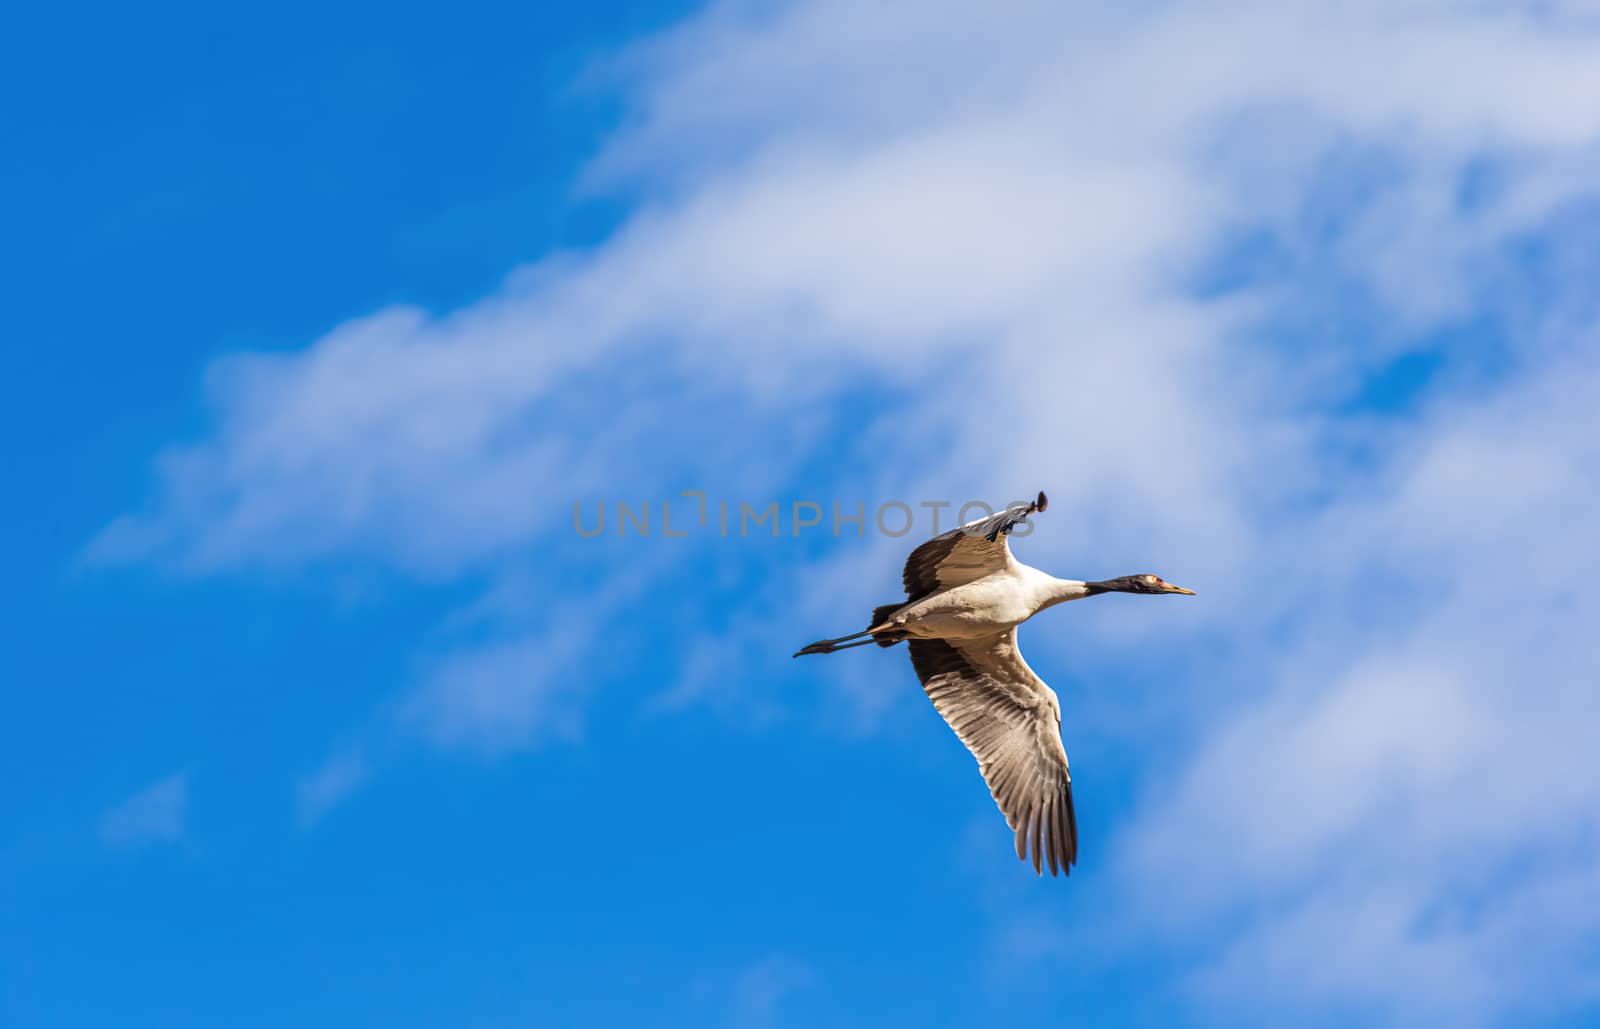 Black-necked crane flying in front of blue sky with white clouds